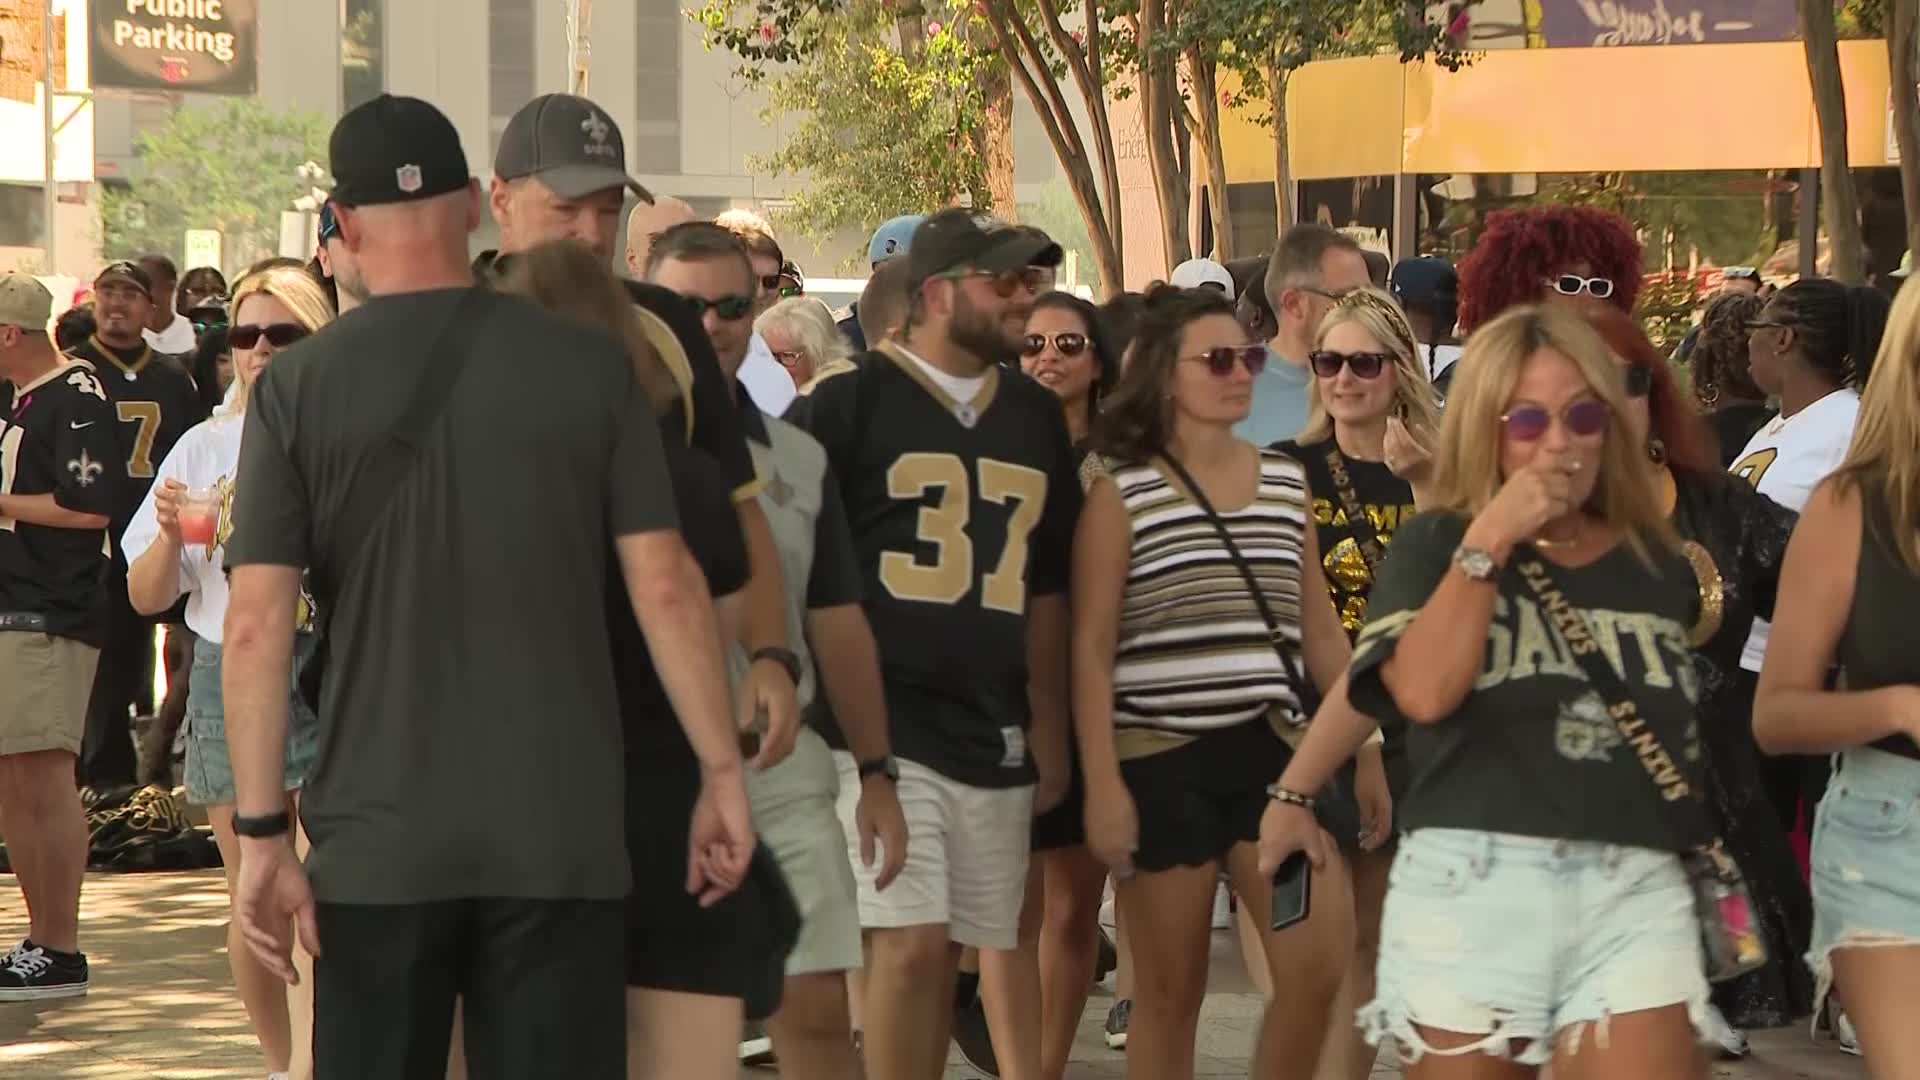 New Orleans Saints fans celebrate first game of season